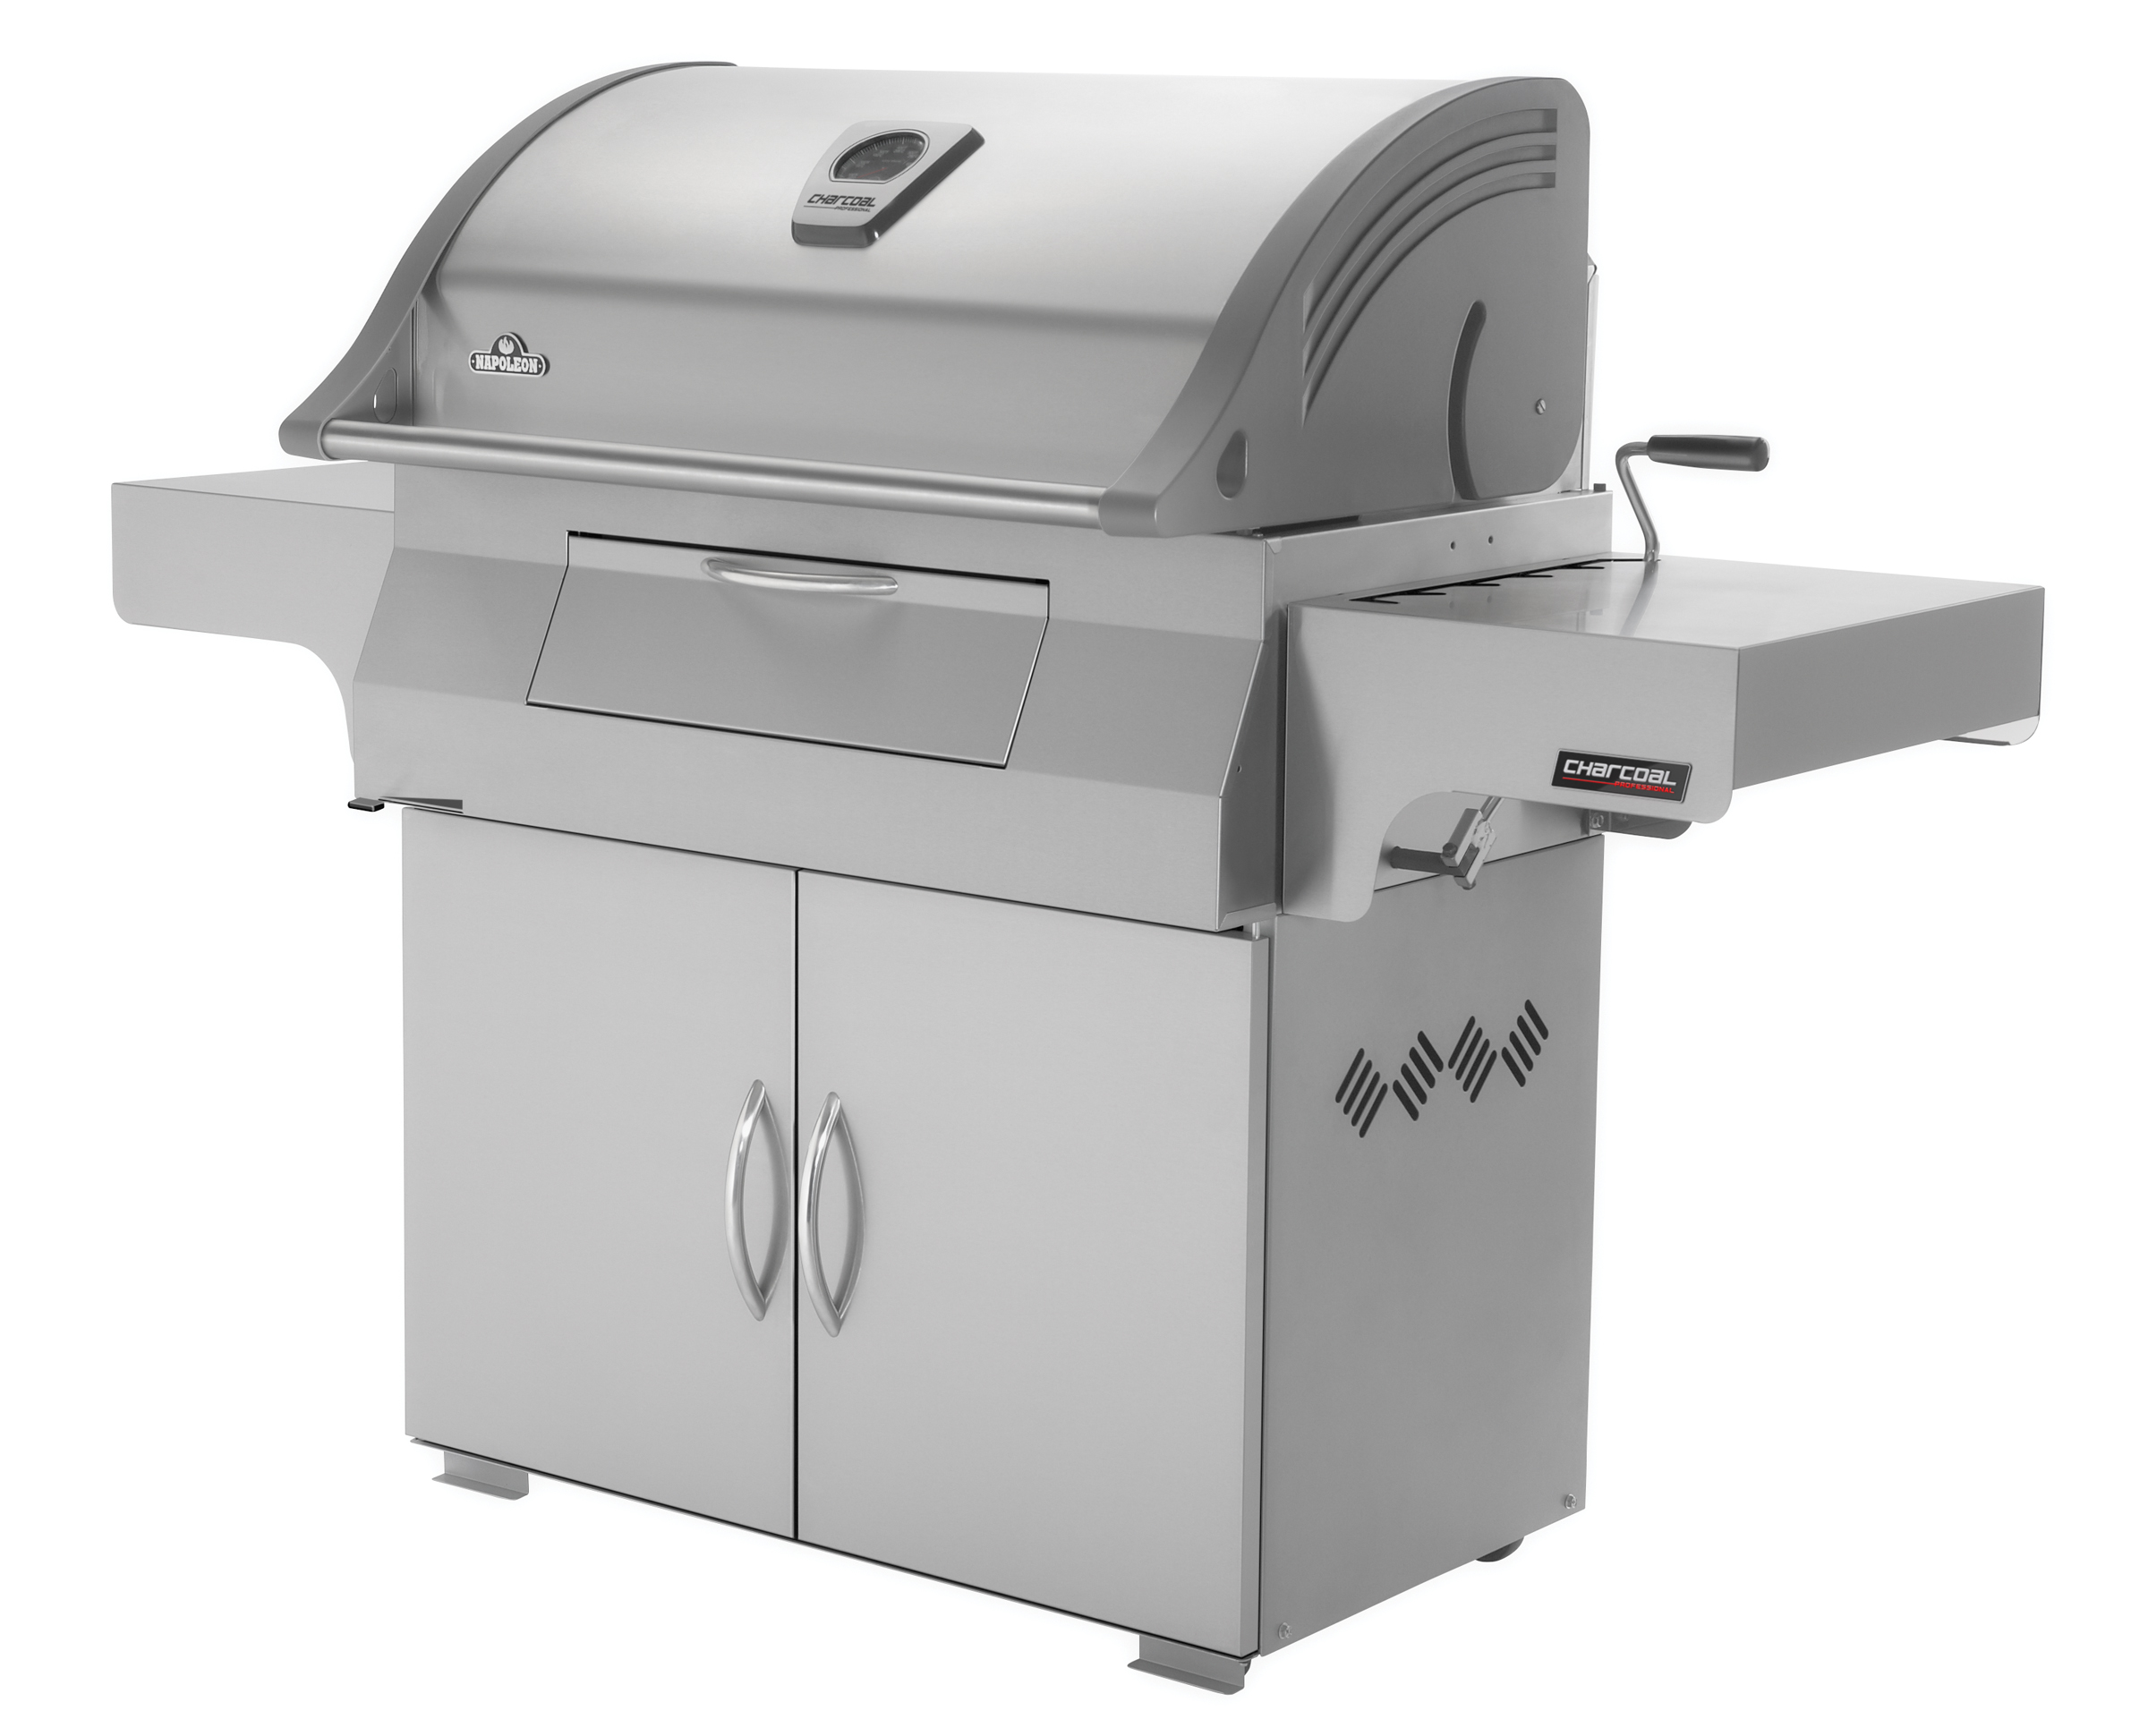 Charcoal Professional Grill, Stainless Steel - PRO605CSS - image 2 of 7